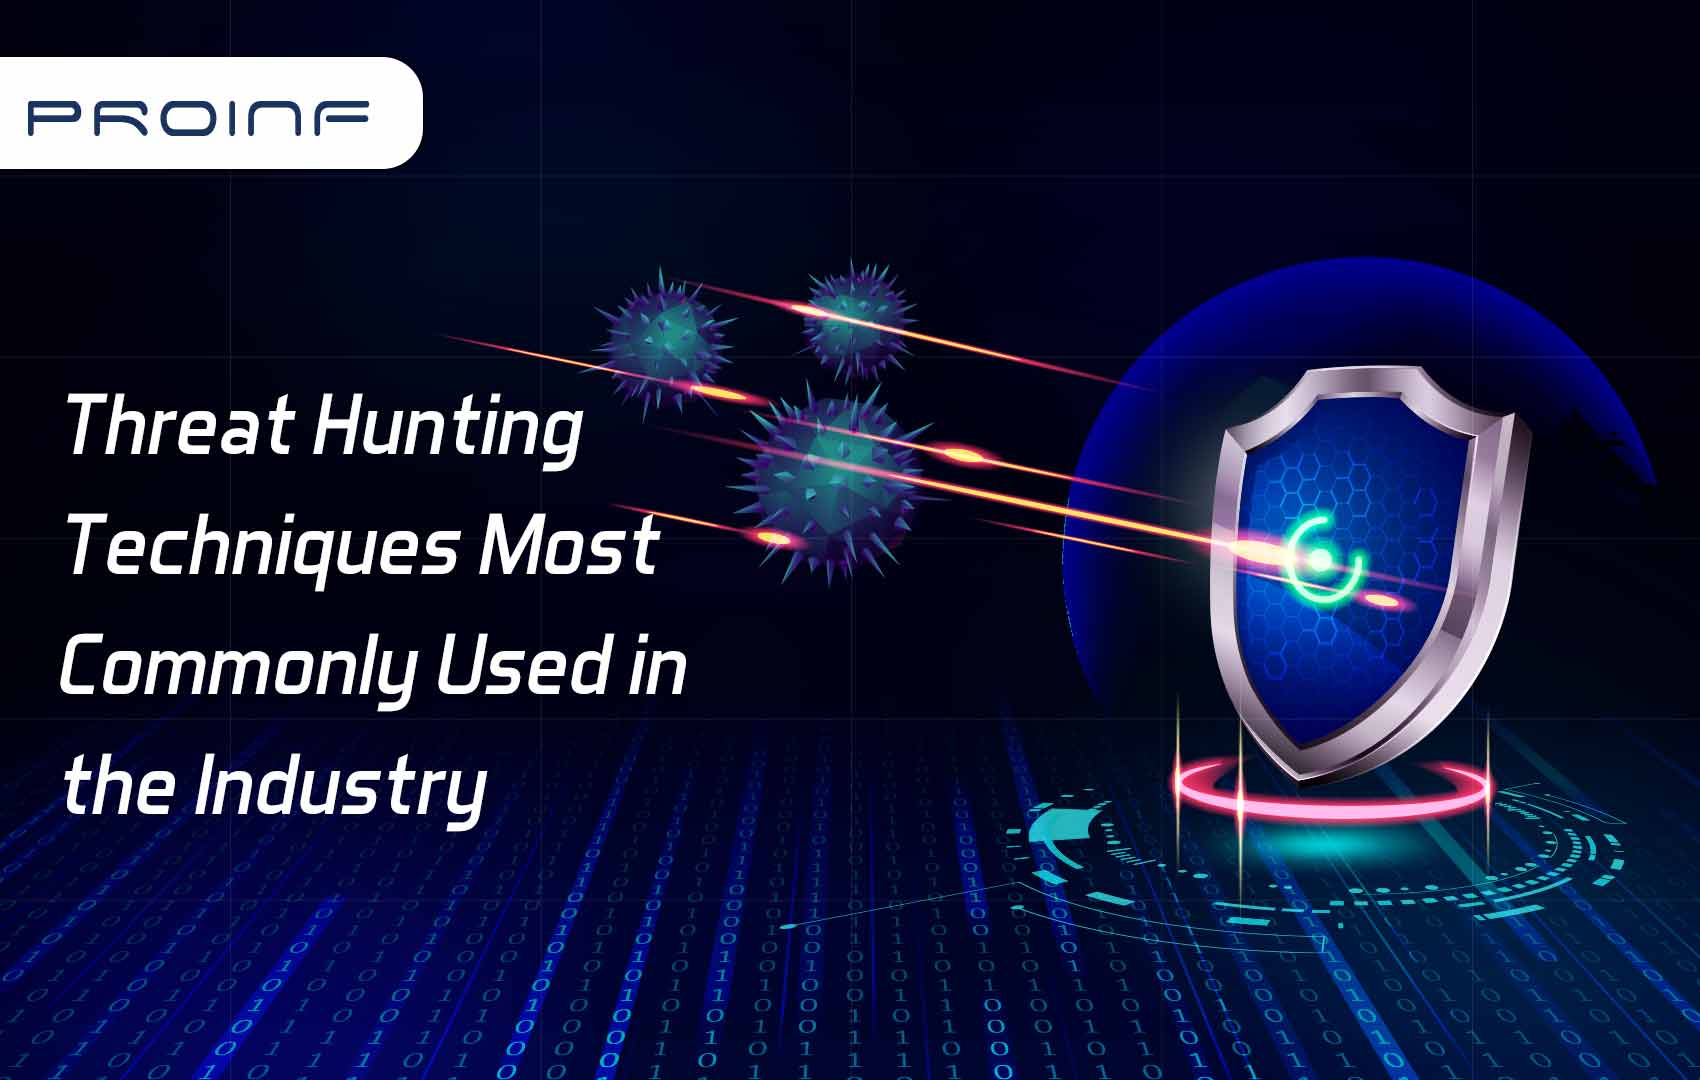 Threat Hunting Techniques Most Commonly Used in the Industry